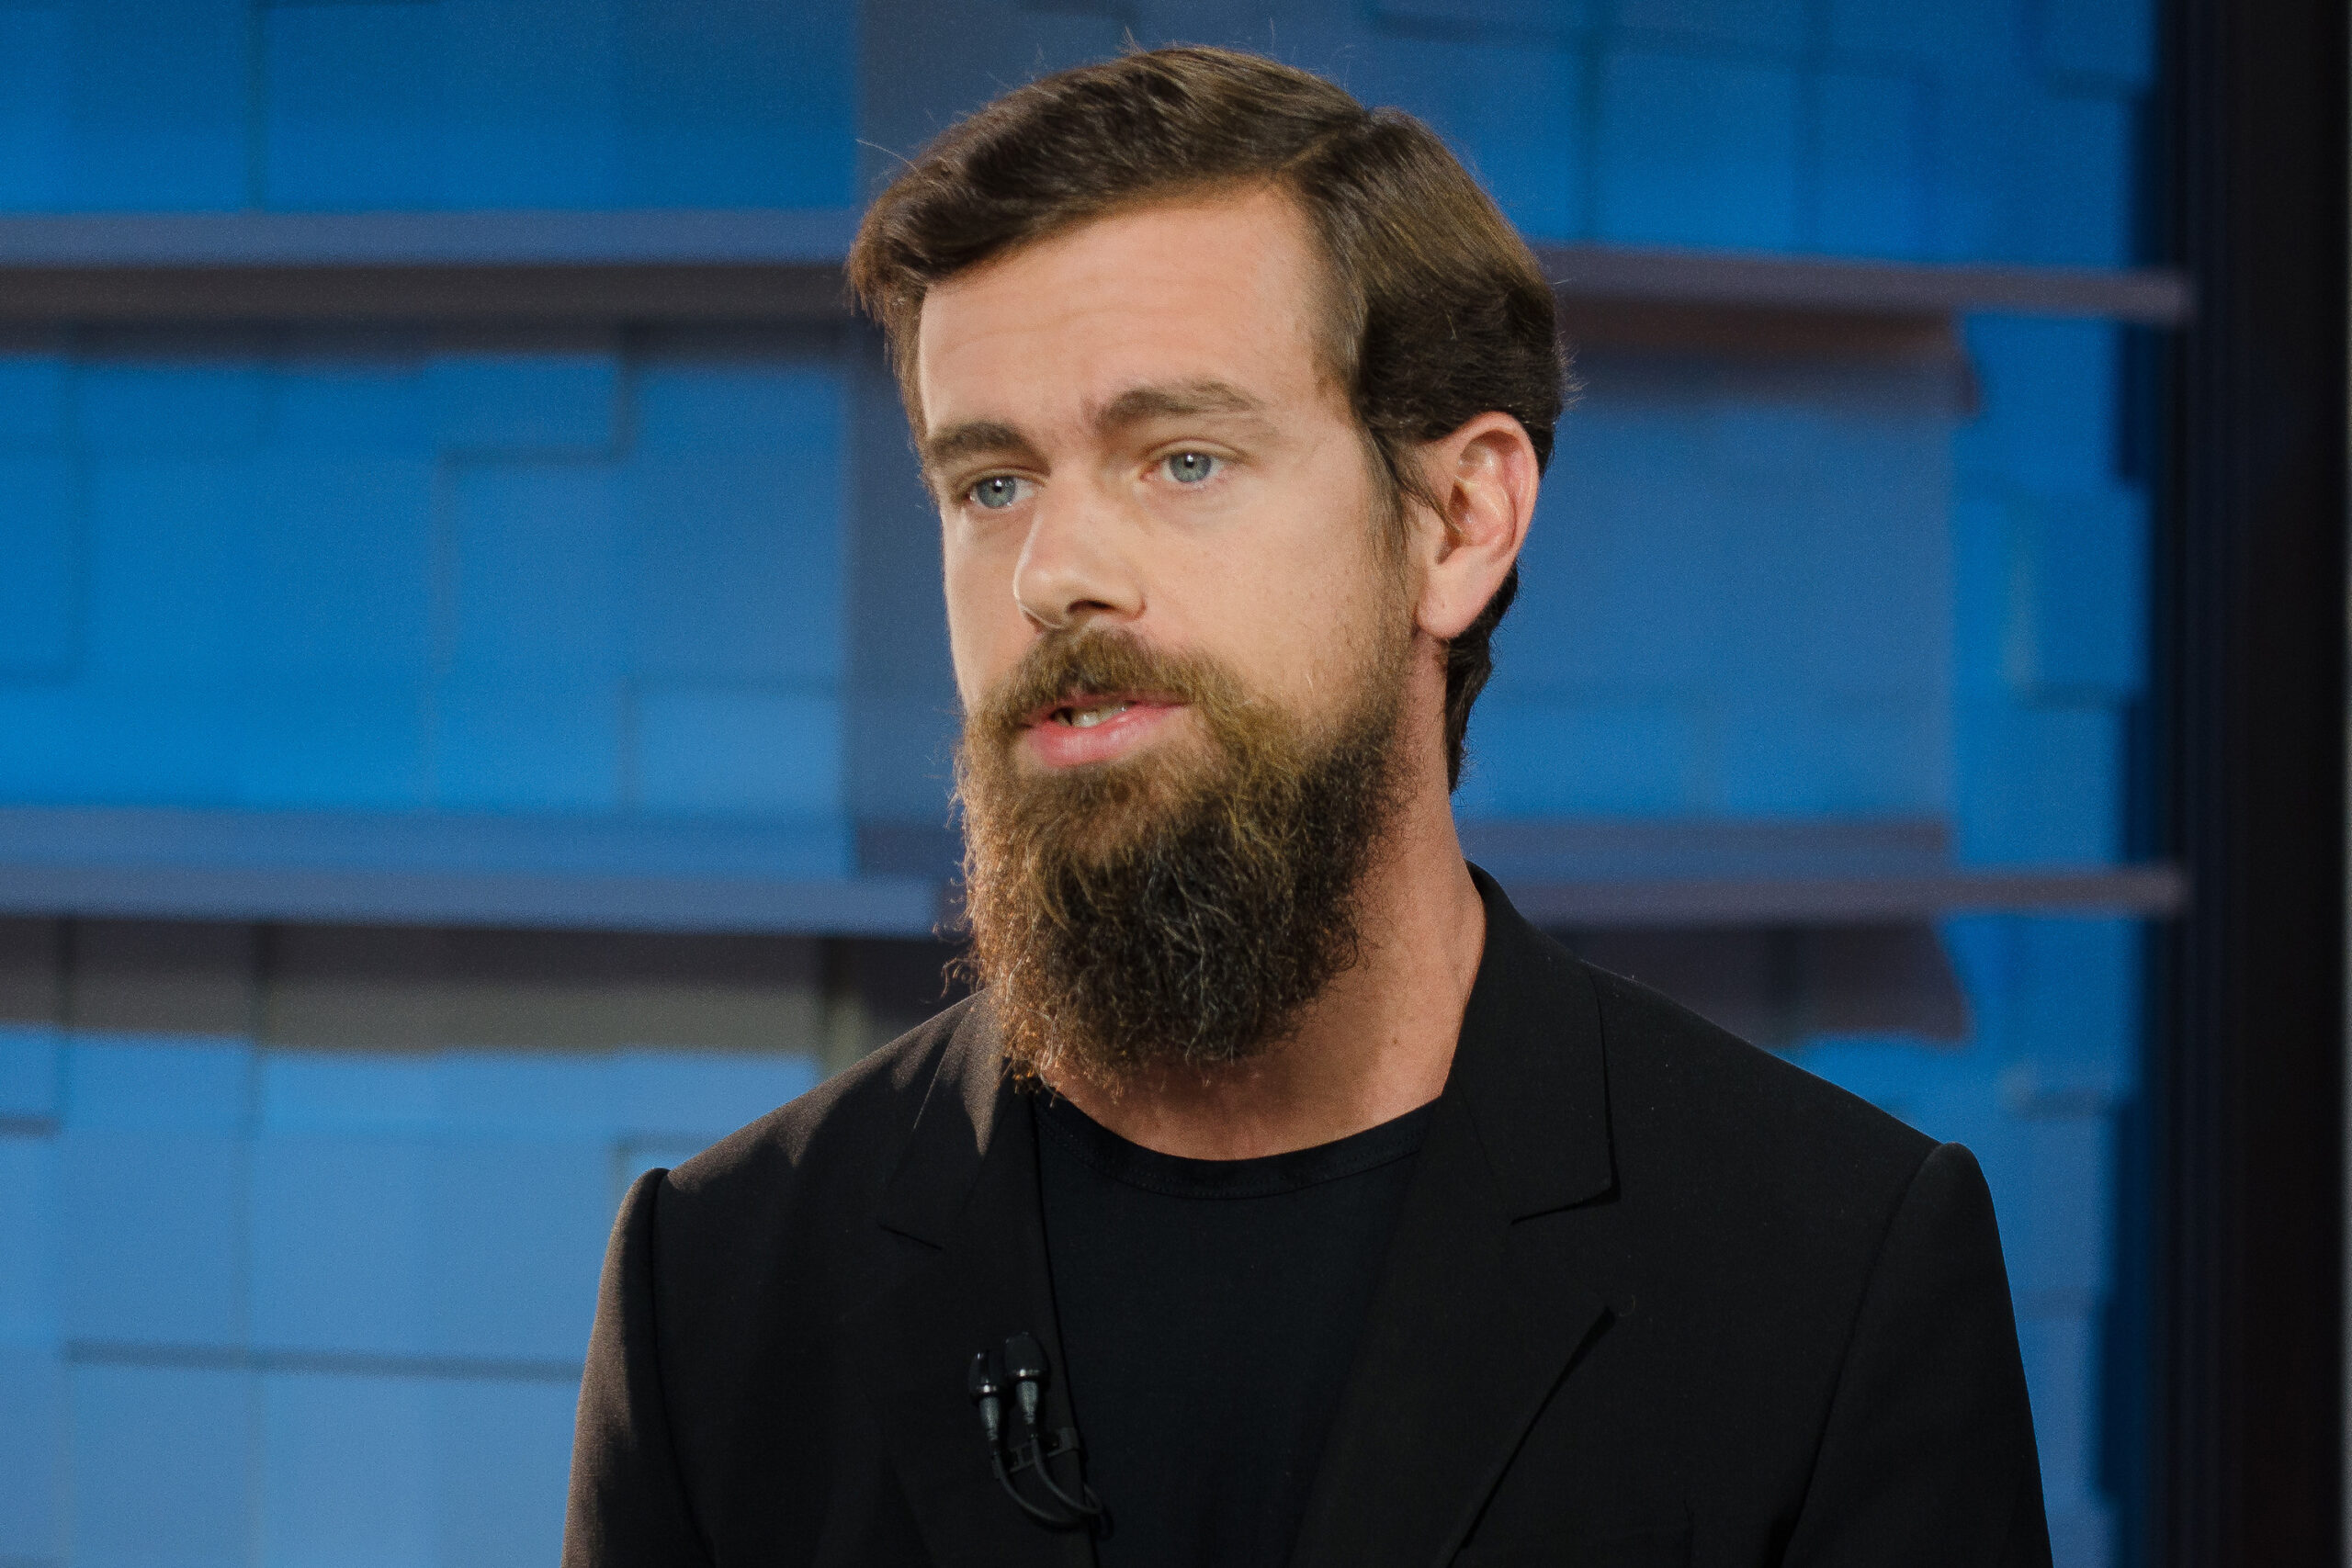 Jack Dorsey Is Moving To Africa